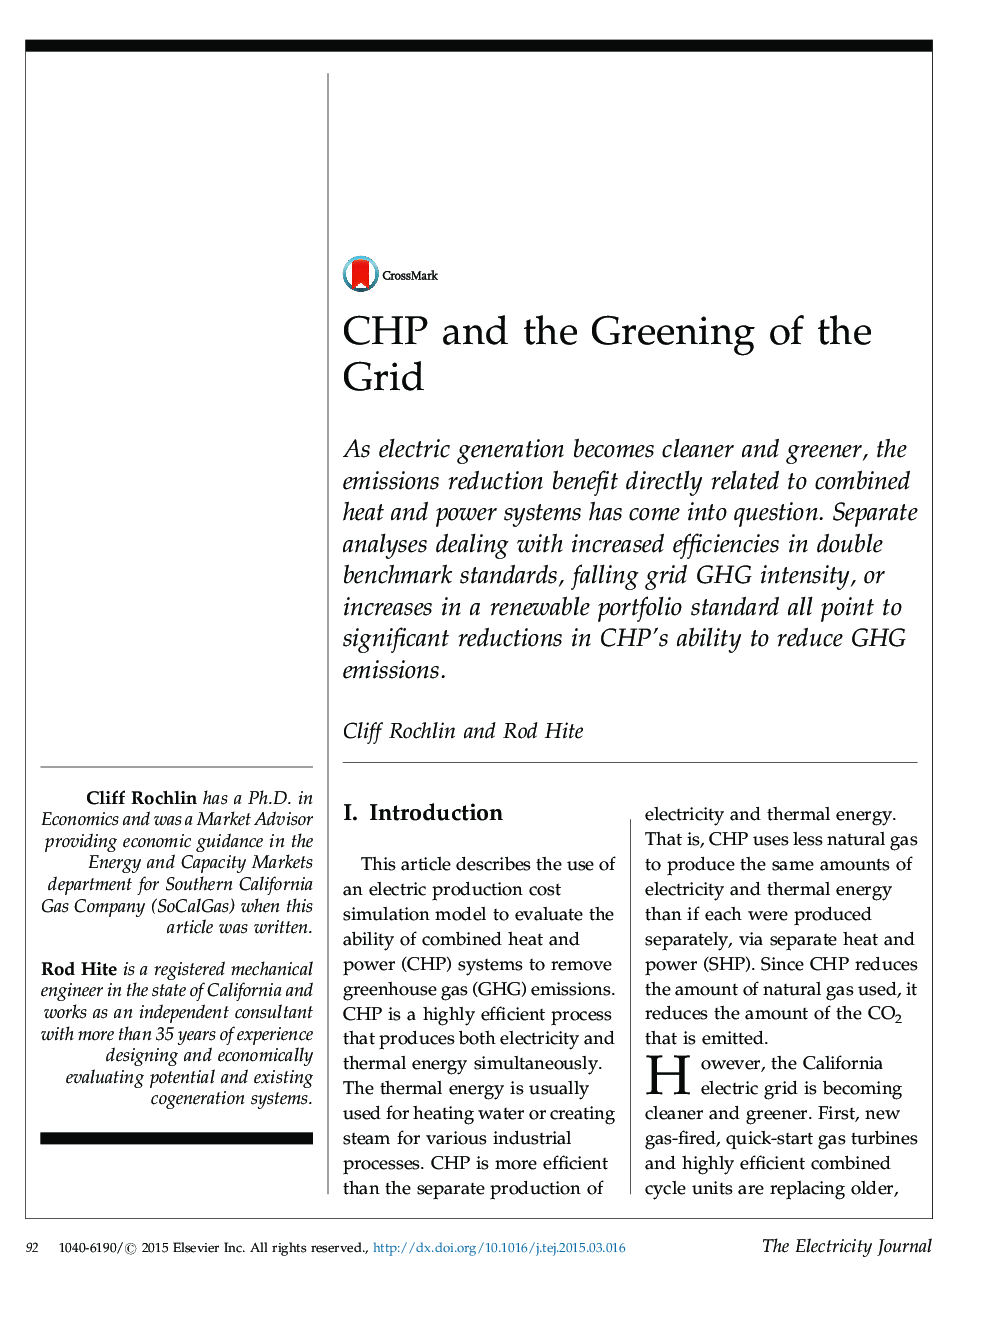 CHP and the Greening of the Grid